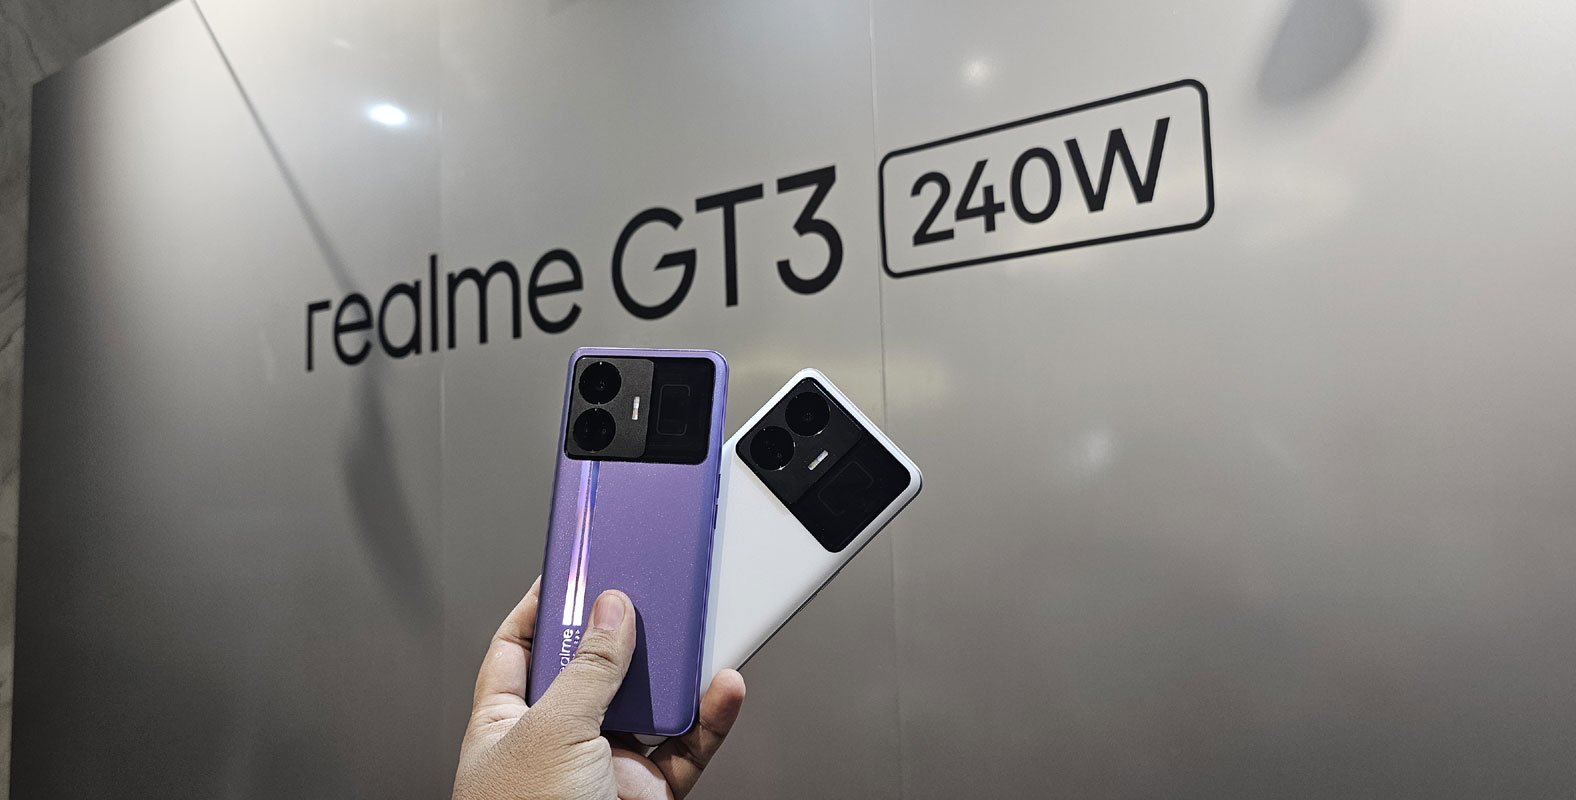 Realme GT3 hands-on review: Design and hardware